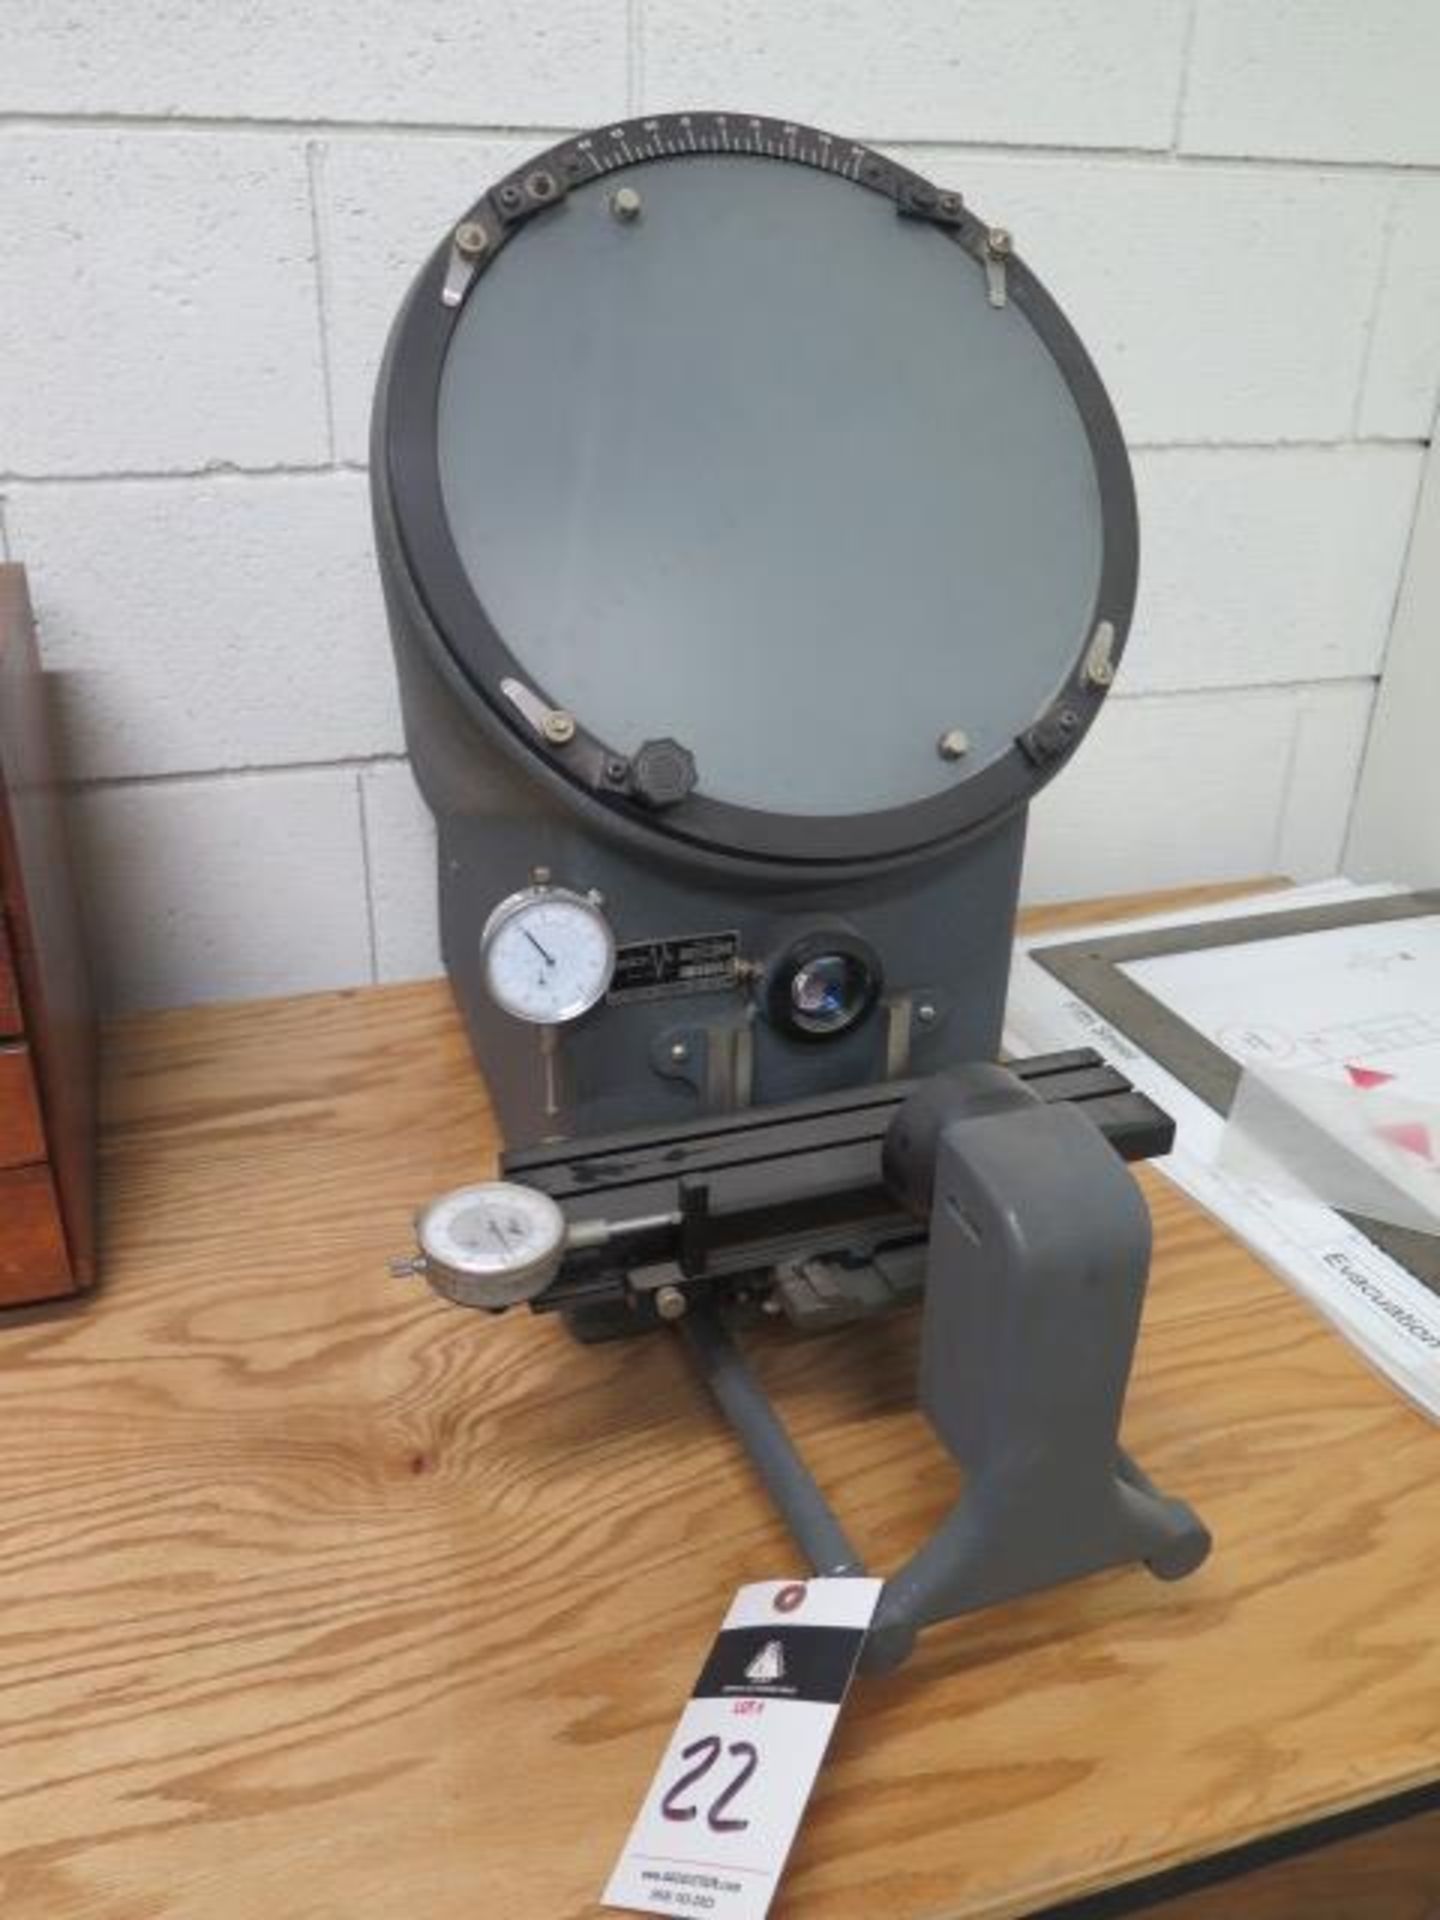 MicroVu mdl. 500HP 12” Table Model Optical Comparator s/n 22978 w/ Dial Indicator Readouts, Surfce